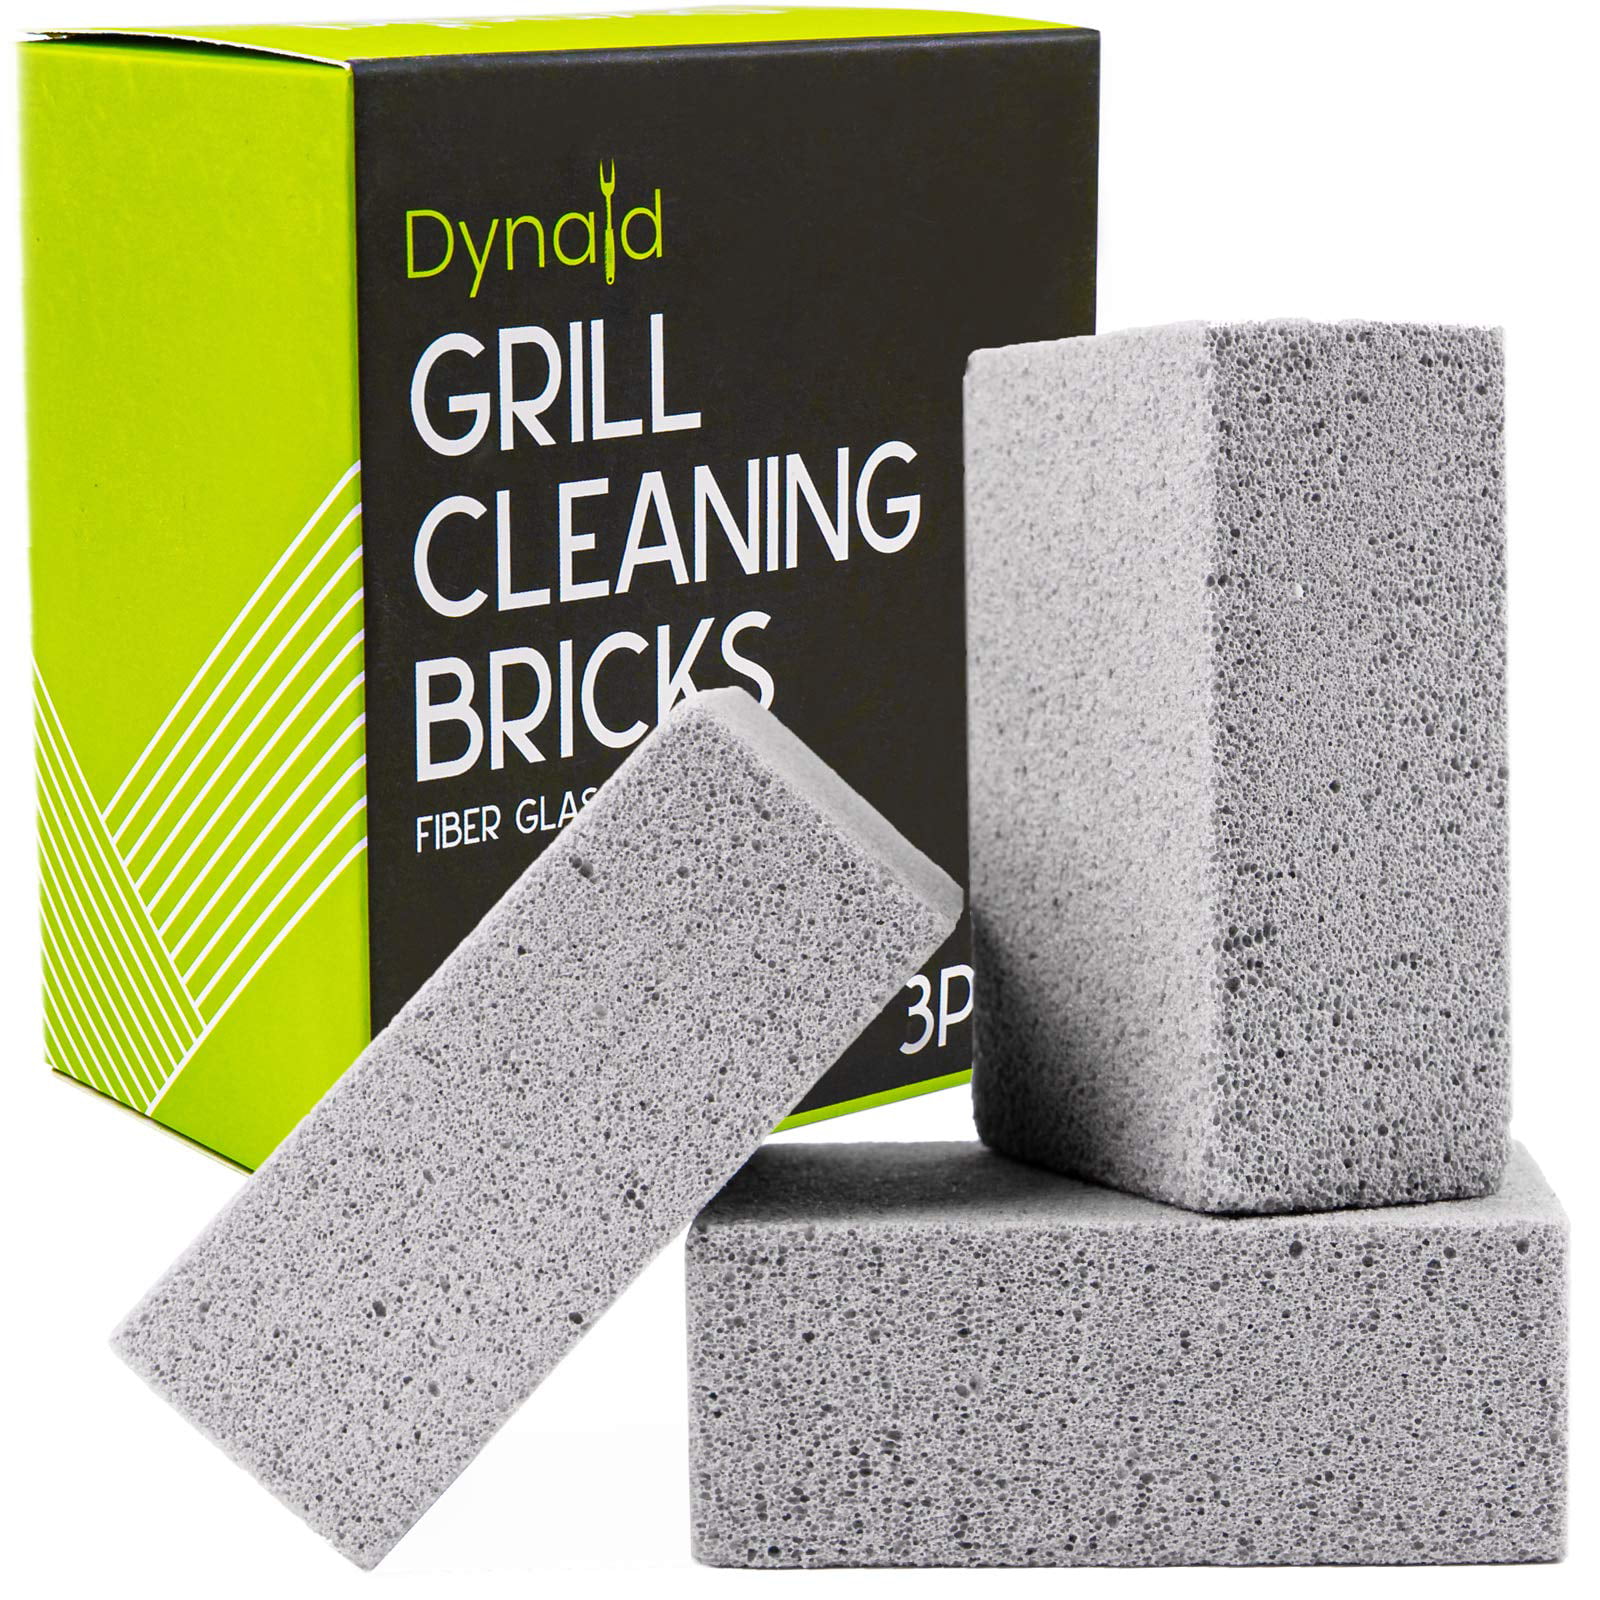 Commercial Grade Pumice Stone Tool Cl... Heavy Duty Grill Cleaning Brick 1 Pack 